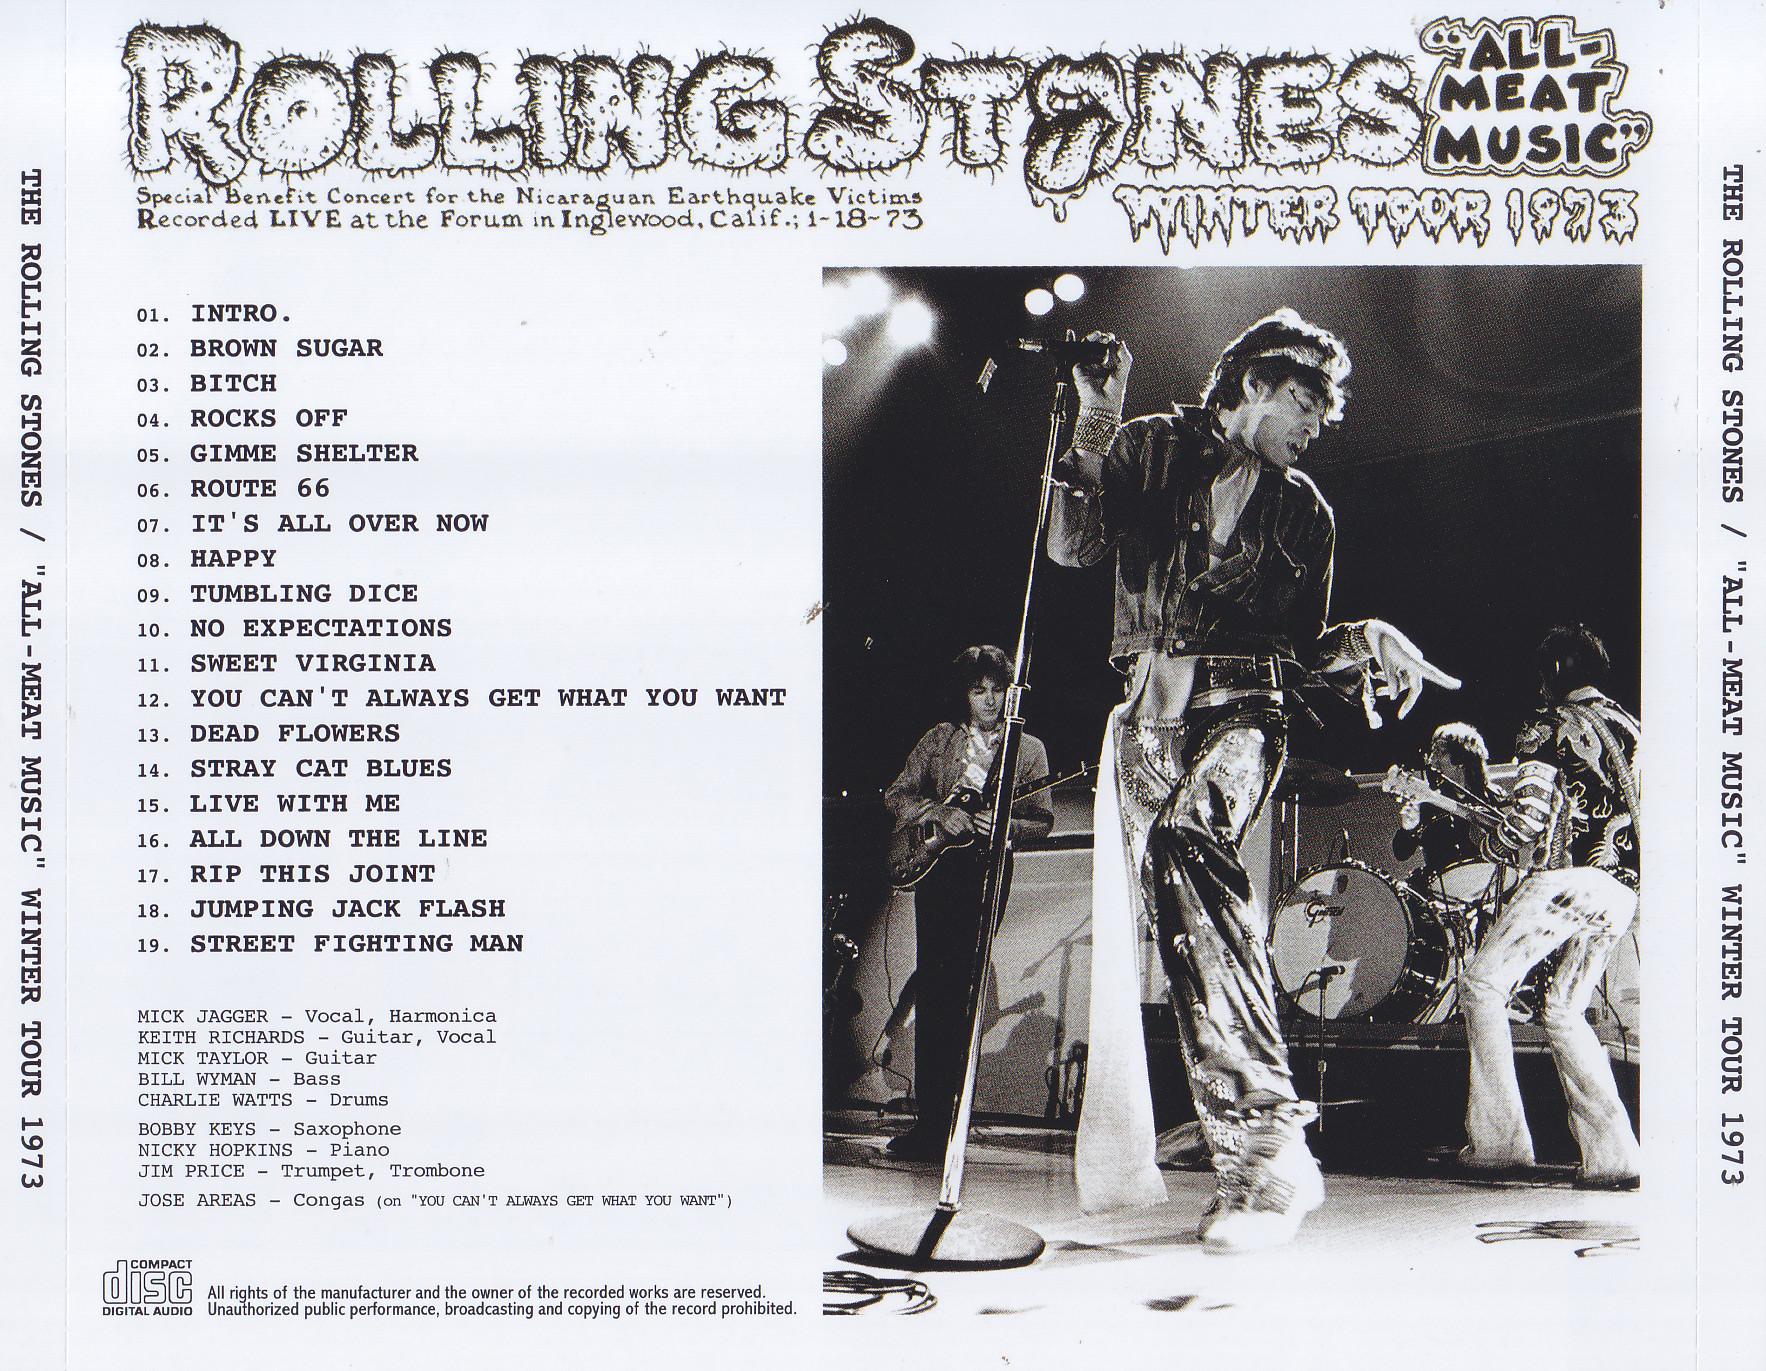 Rolling Stones / All Meat Music Winter Tour 1973 / 1CD – GiGinJapan